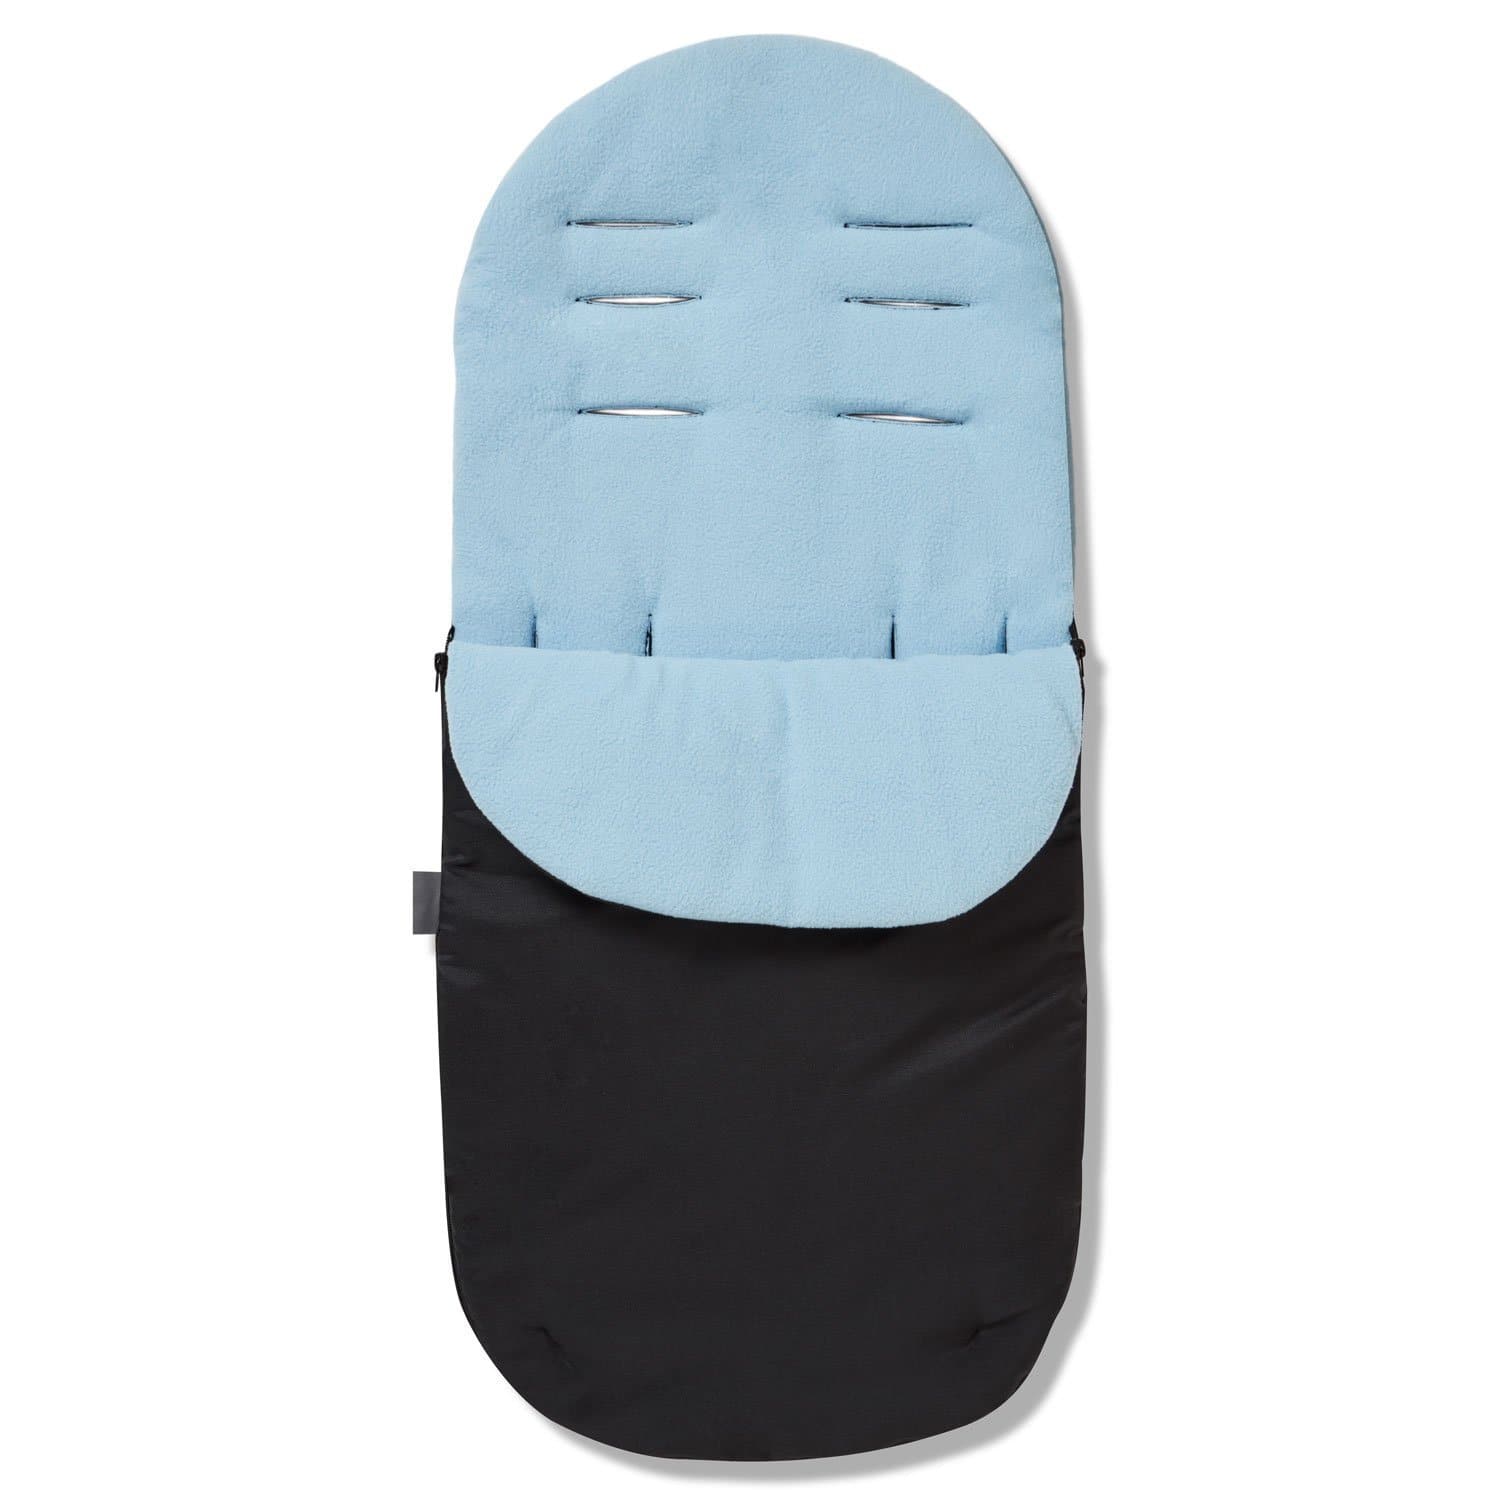 Footmuff / Cosy Toes Compatible with My Child - Light Blue / Fits All Models | For Your Little One